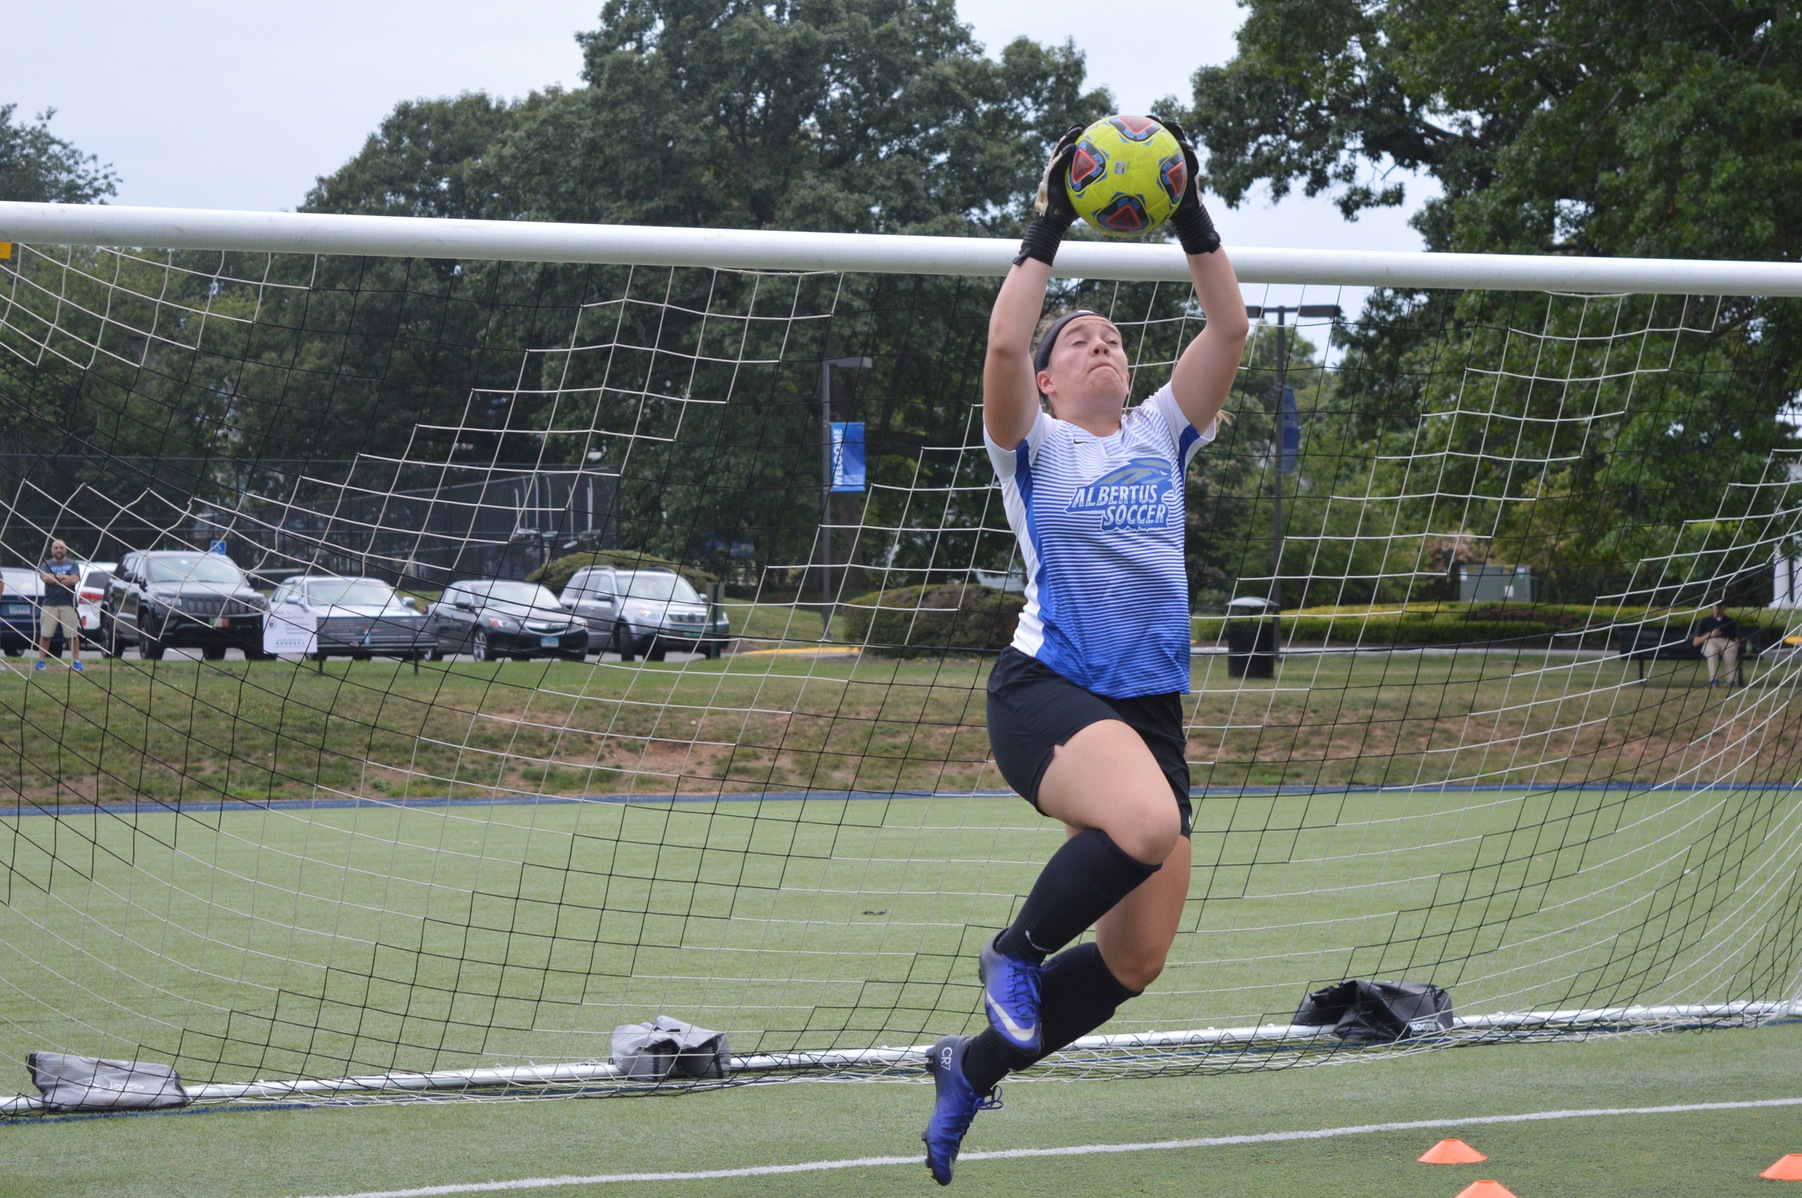 Women's Soccer Blanked by UMass Dartmouth, 2-0